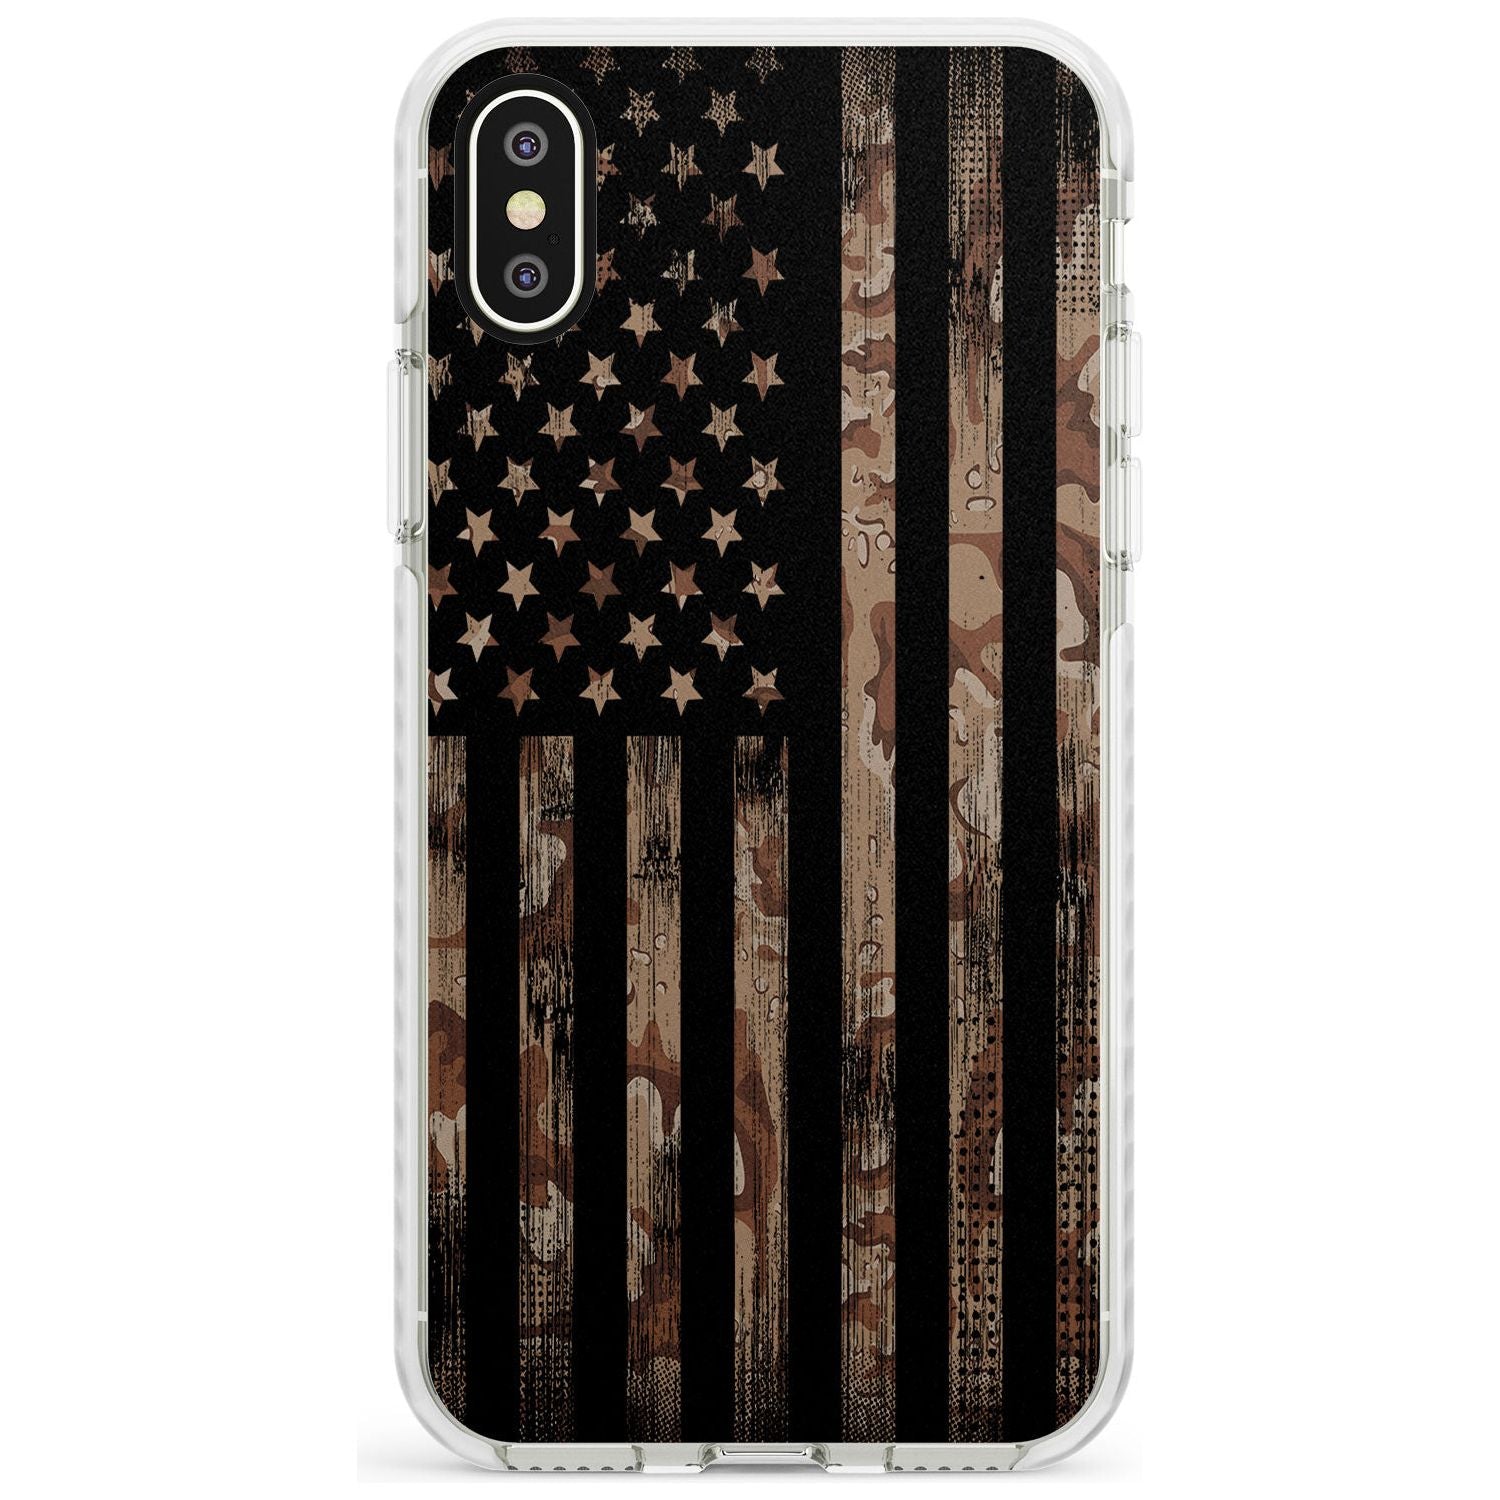 Desert Camo US Flag Impact Phone Case for iPhone X XS Max XR